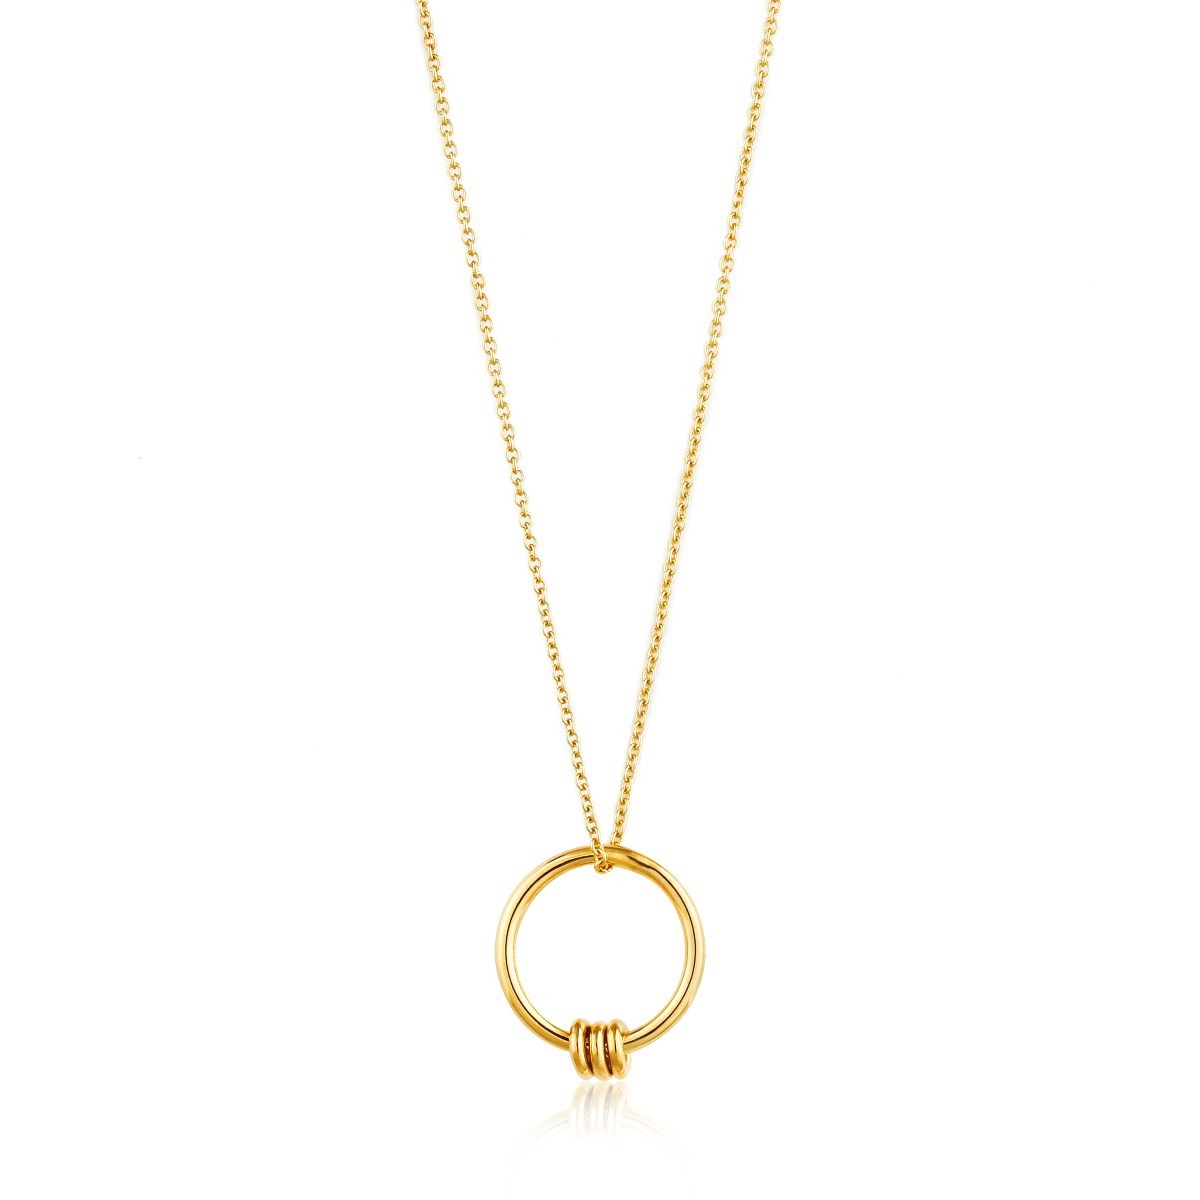 Ania Haie Modern Circle Necklace - Gold